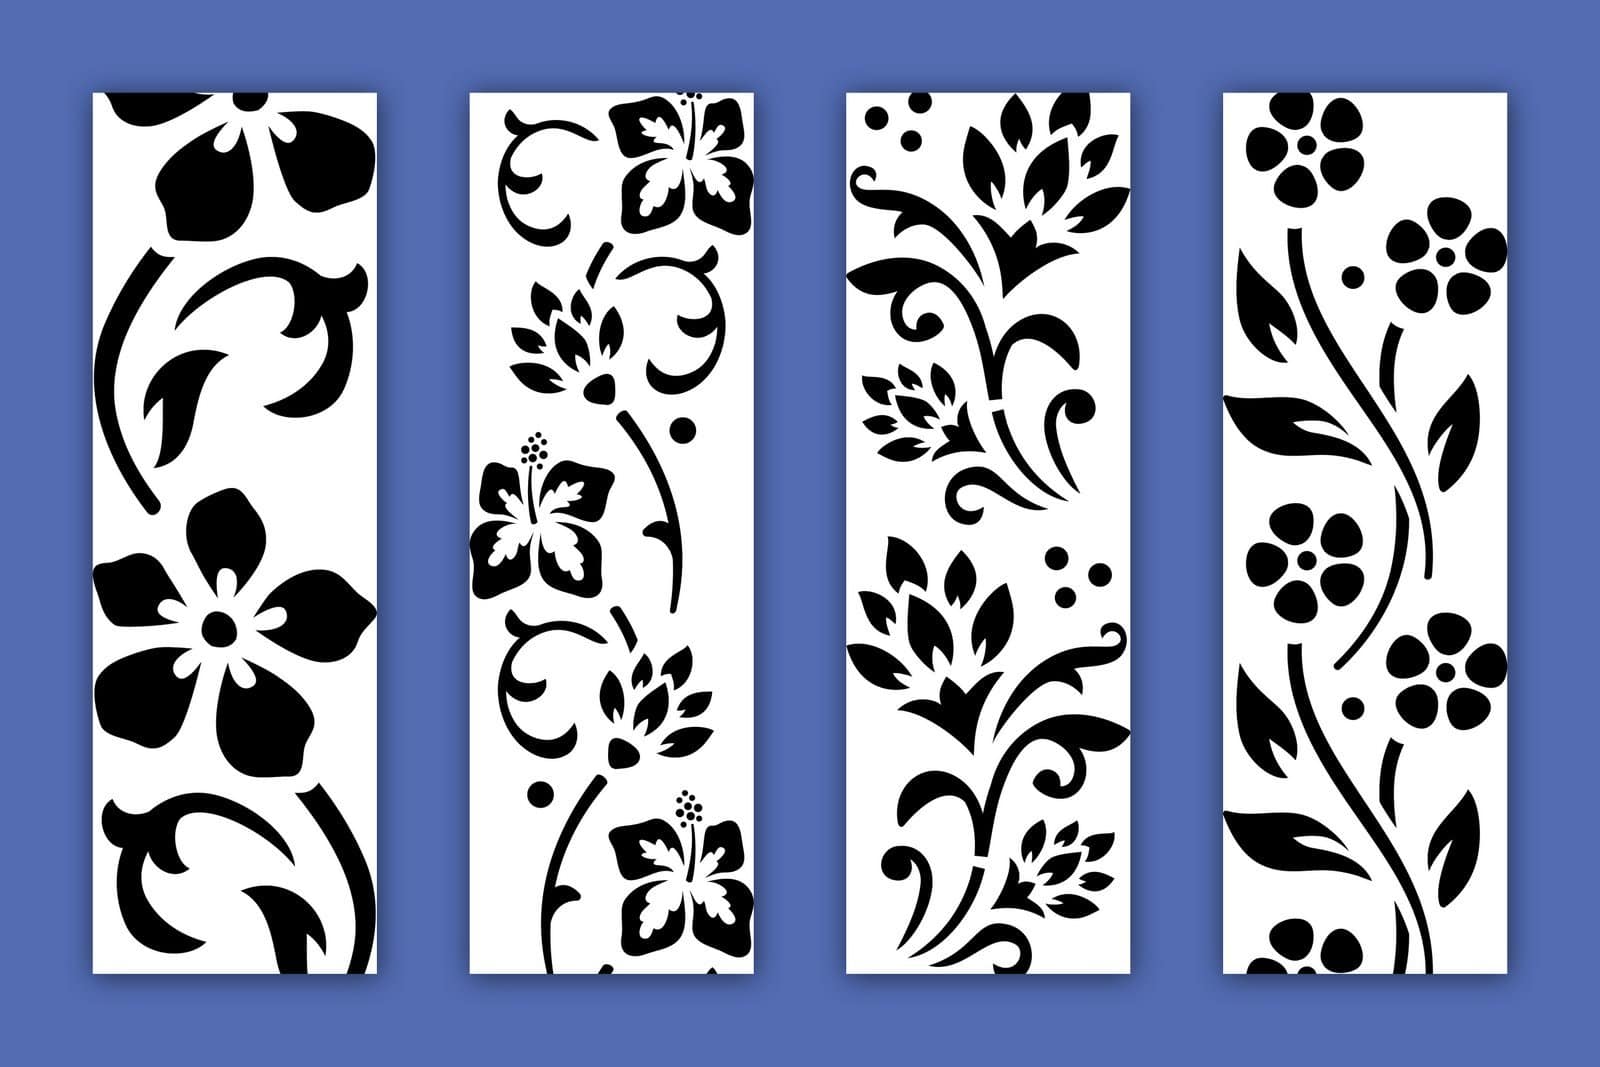 10-free-flower-stencil-designs-for-printing-craft-projects-print